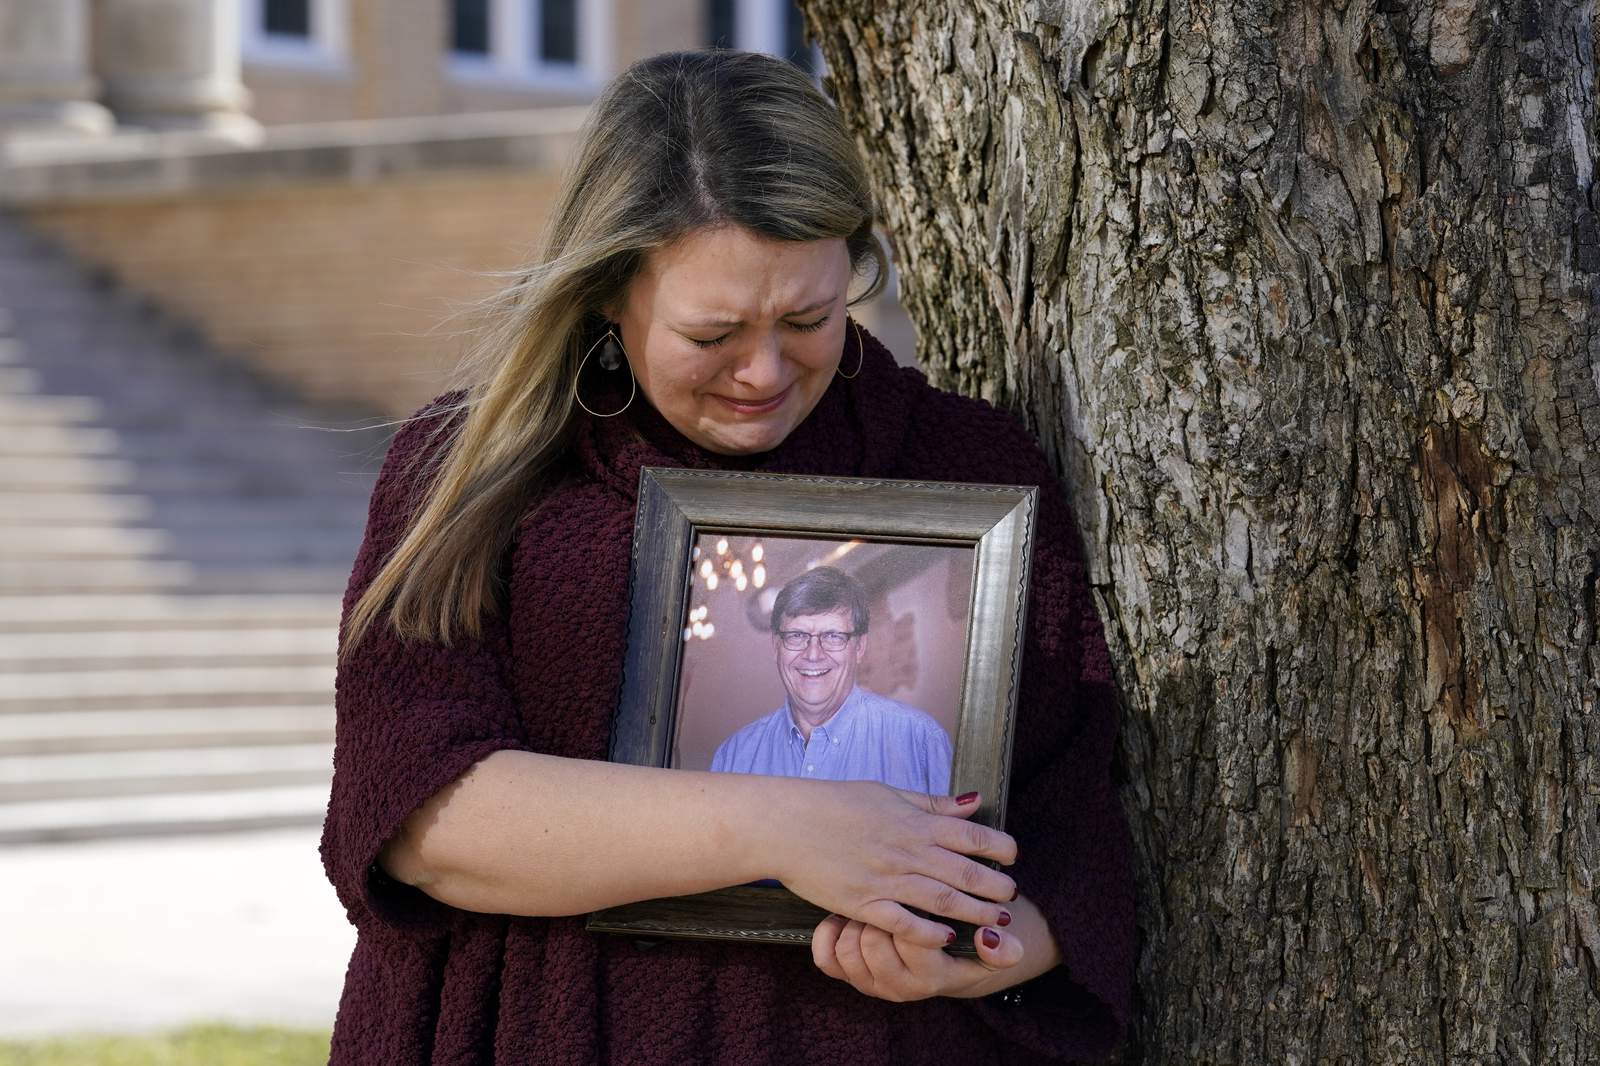 Antivirus rules do not apply.  The grieving Texas family asks: Why?